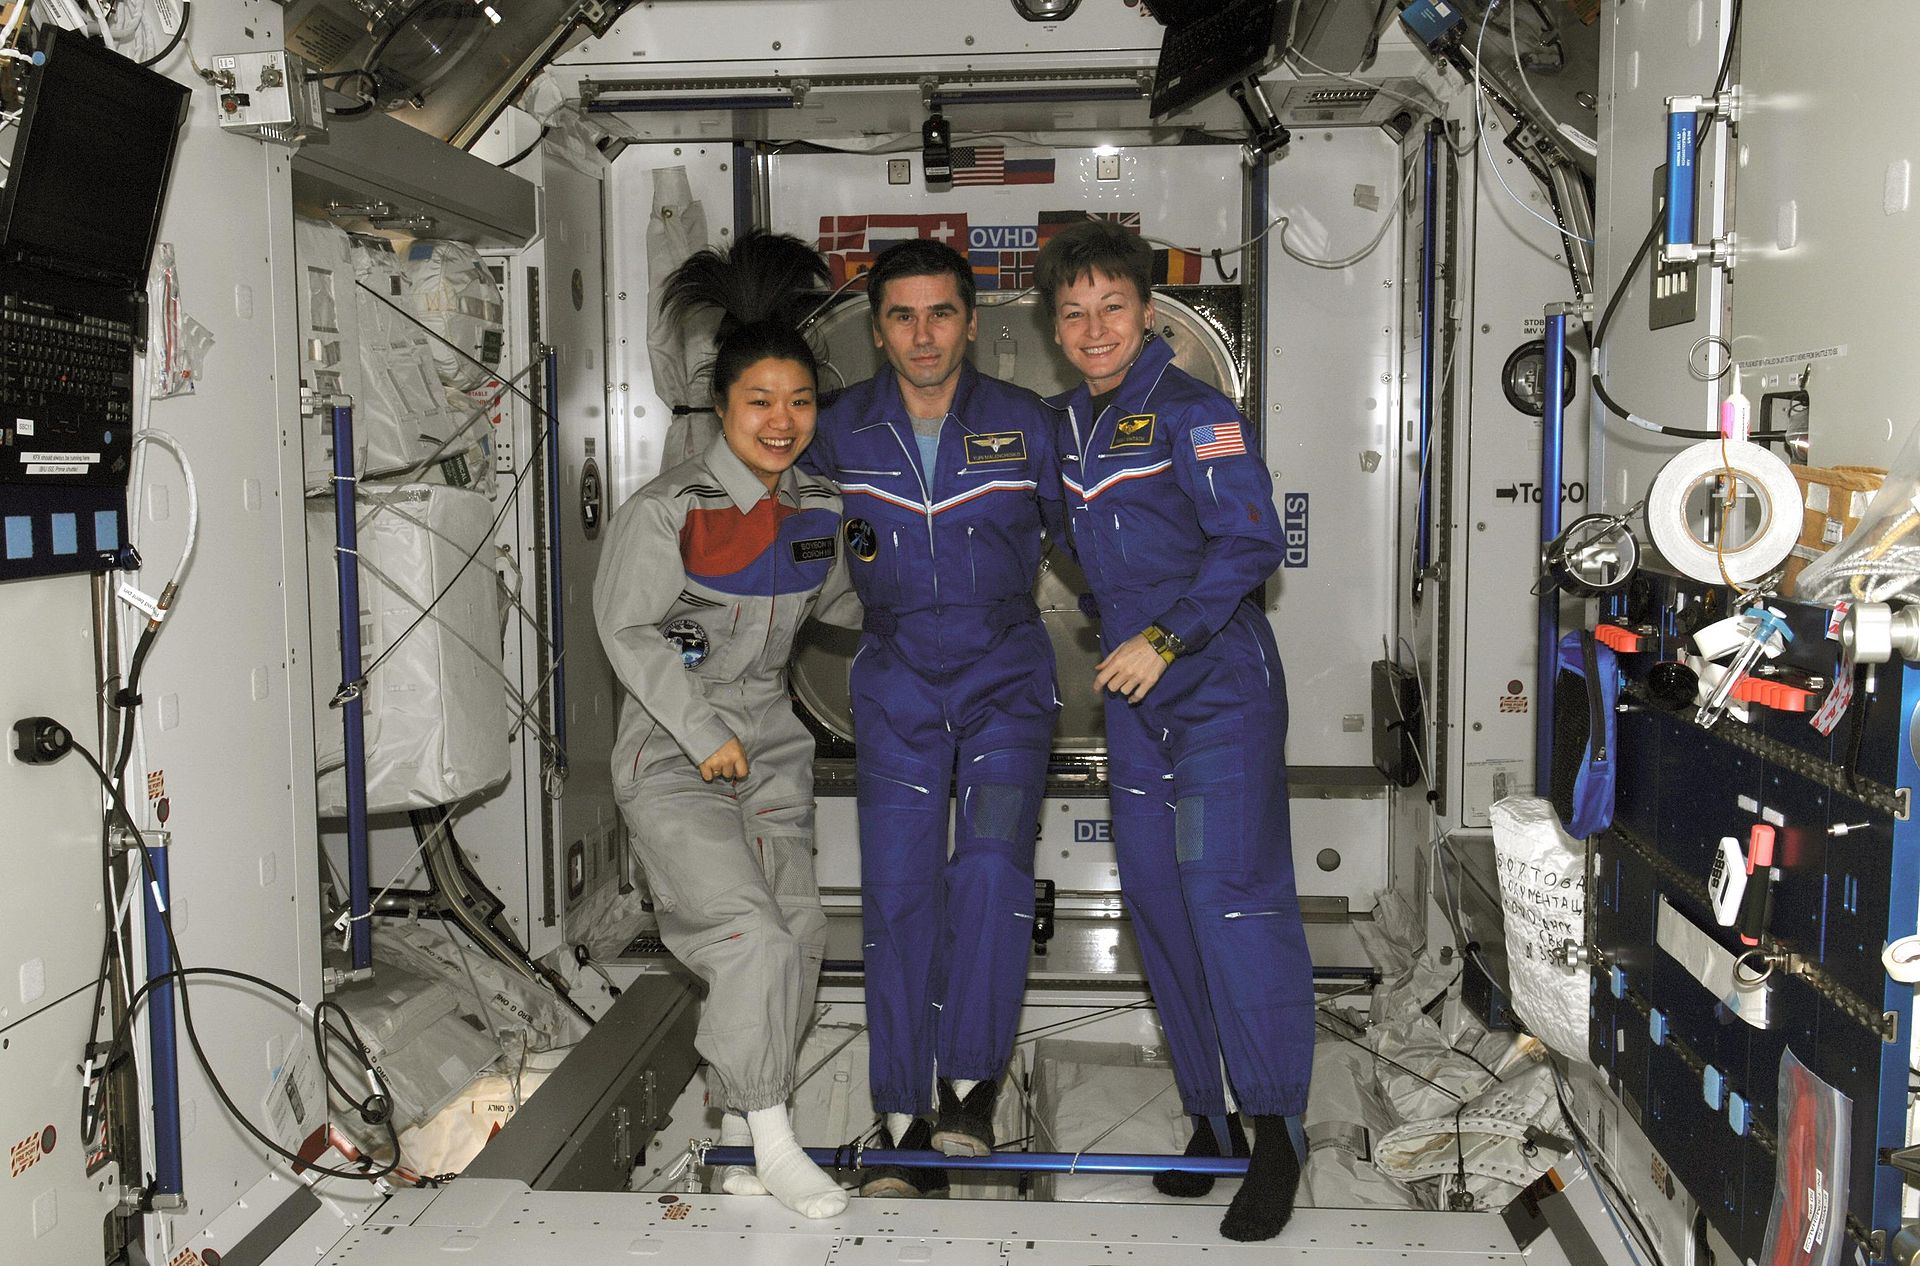 Featured image: 1920px-Yi+Malenchenko+Whitson_at_ISS_08Apr17_(NASA-ISS016-E-036365) - Read full post: Soyeon Yi, Part II: When a Wedding Singer Becomes an Astronaut